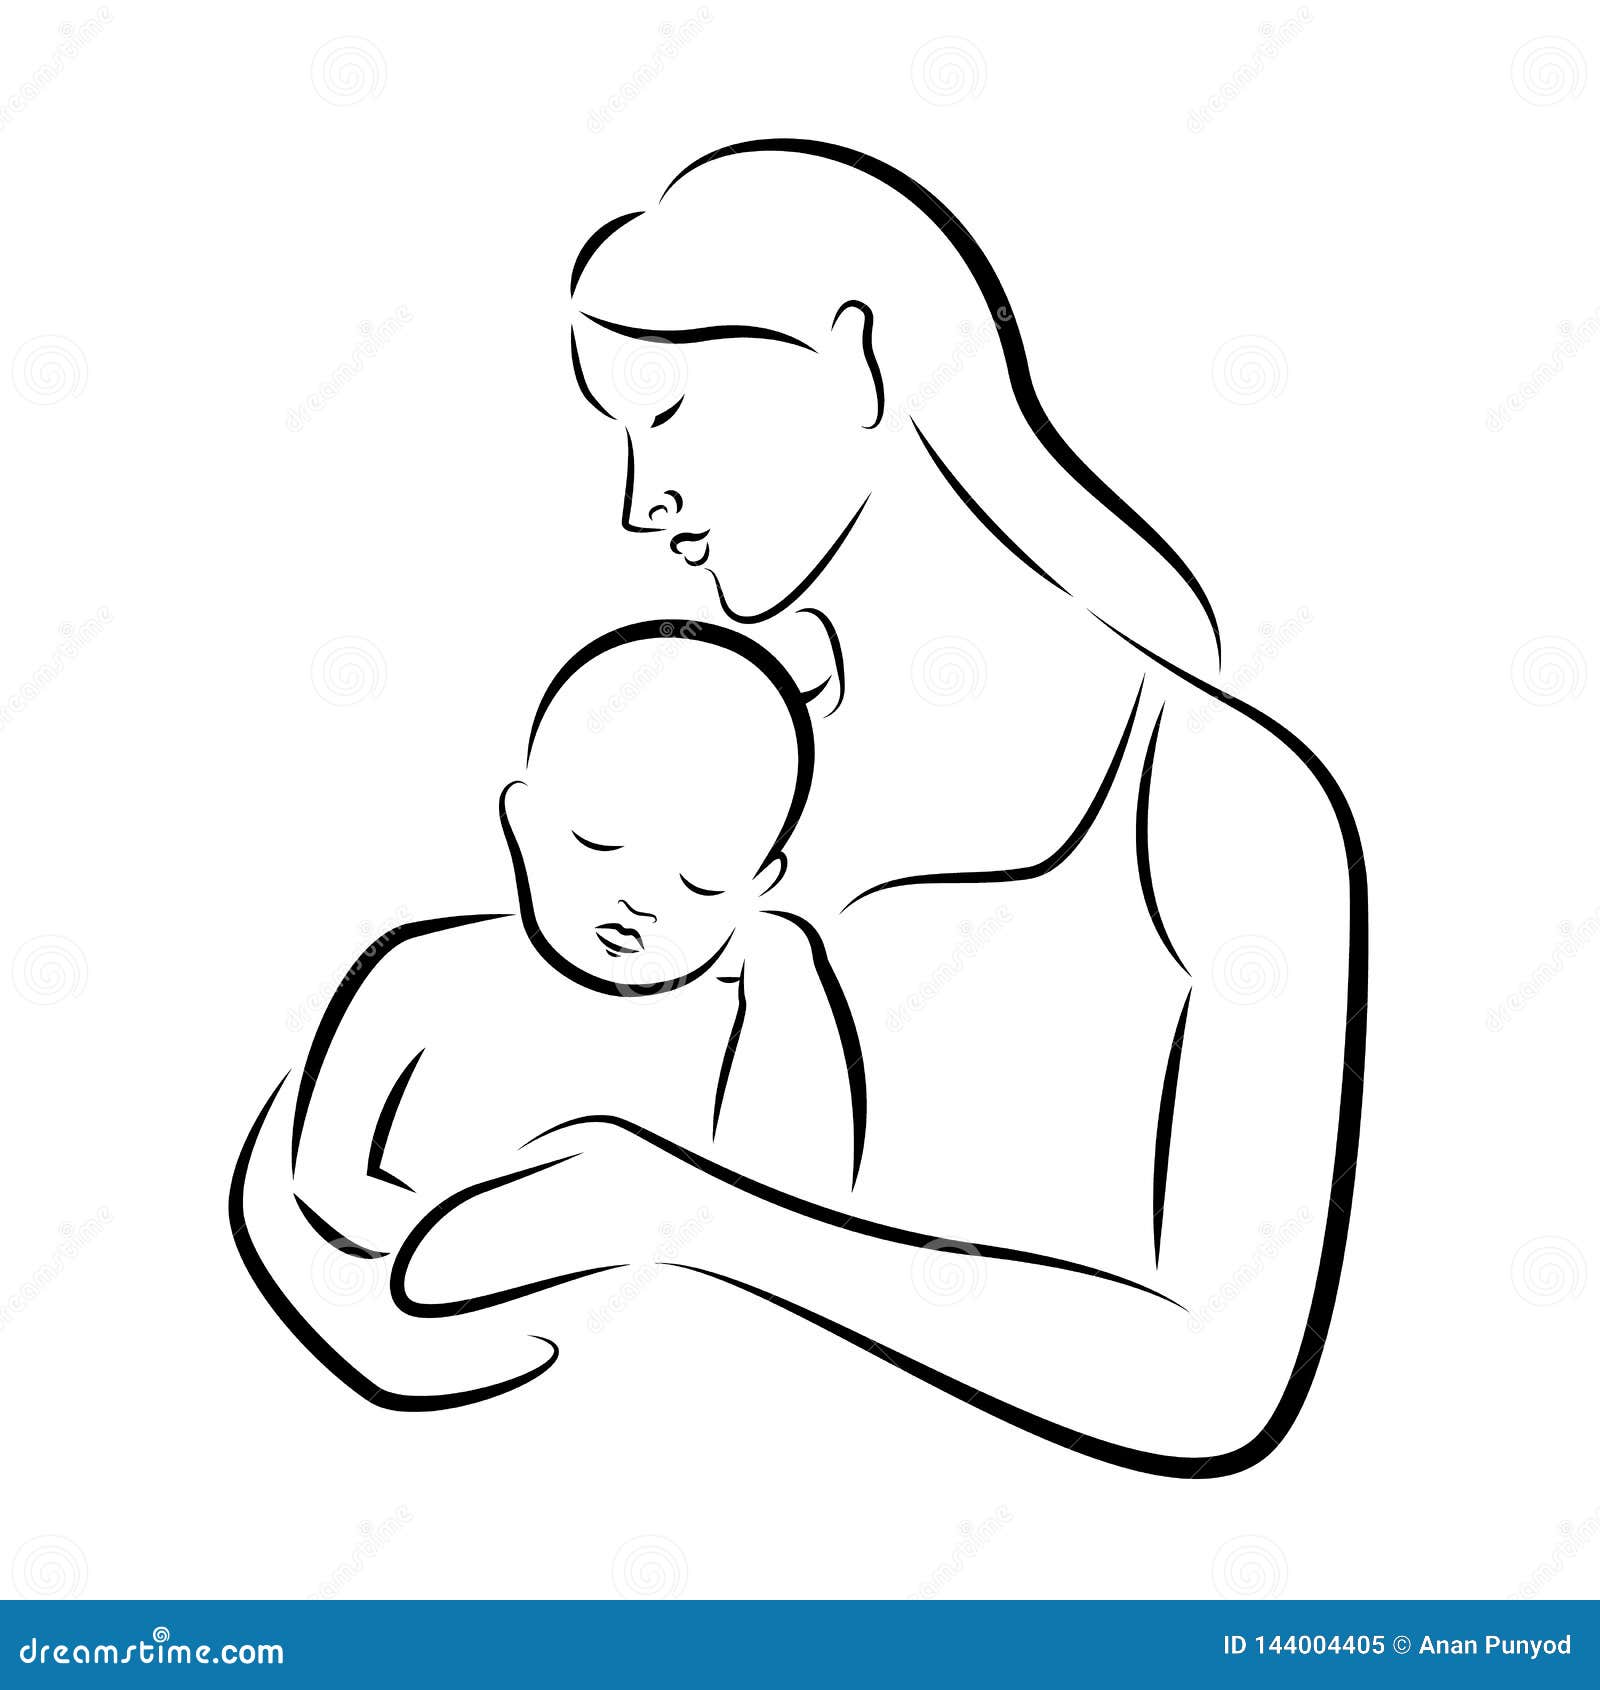 Abstract Drawing Line Mother Hug a Baby Vector Art Design Stock Vector ...